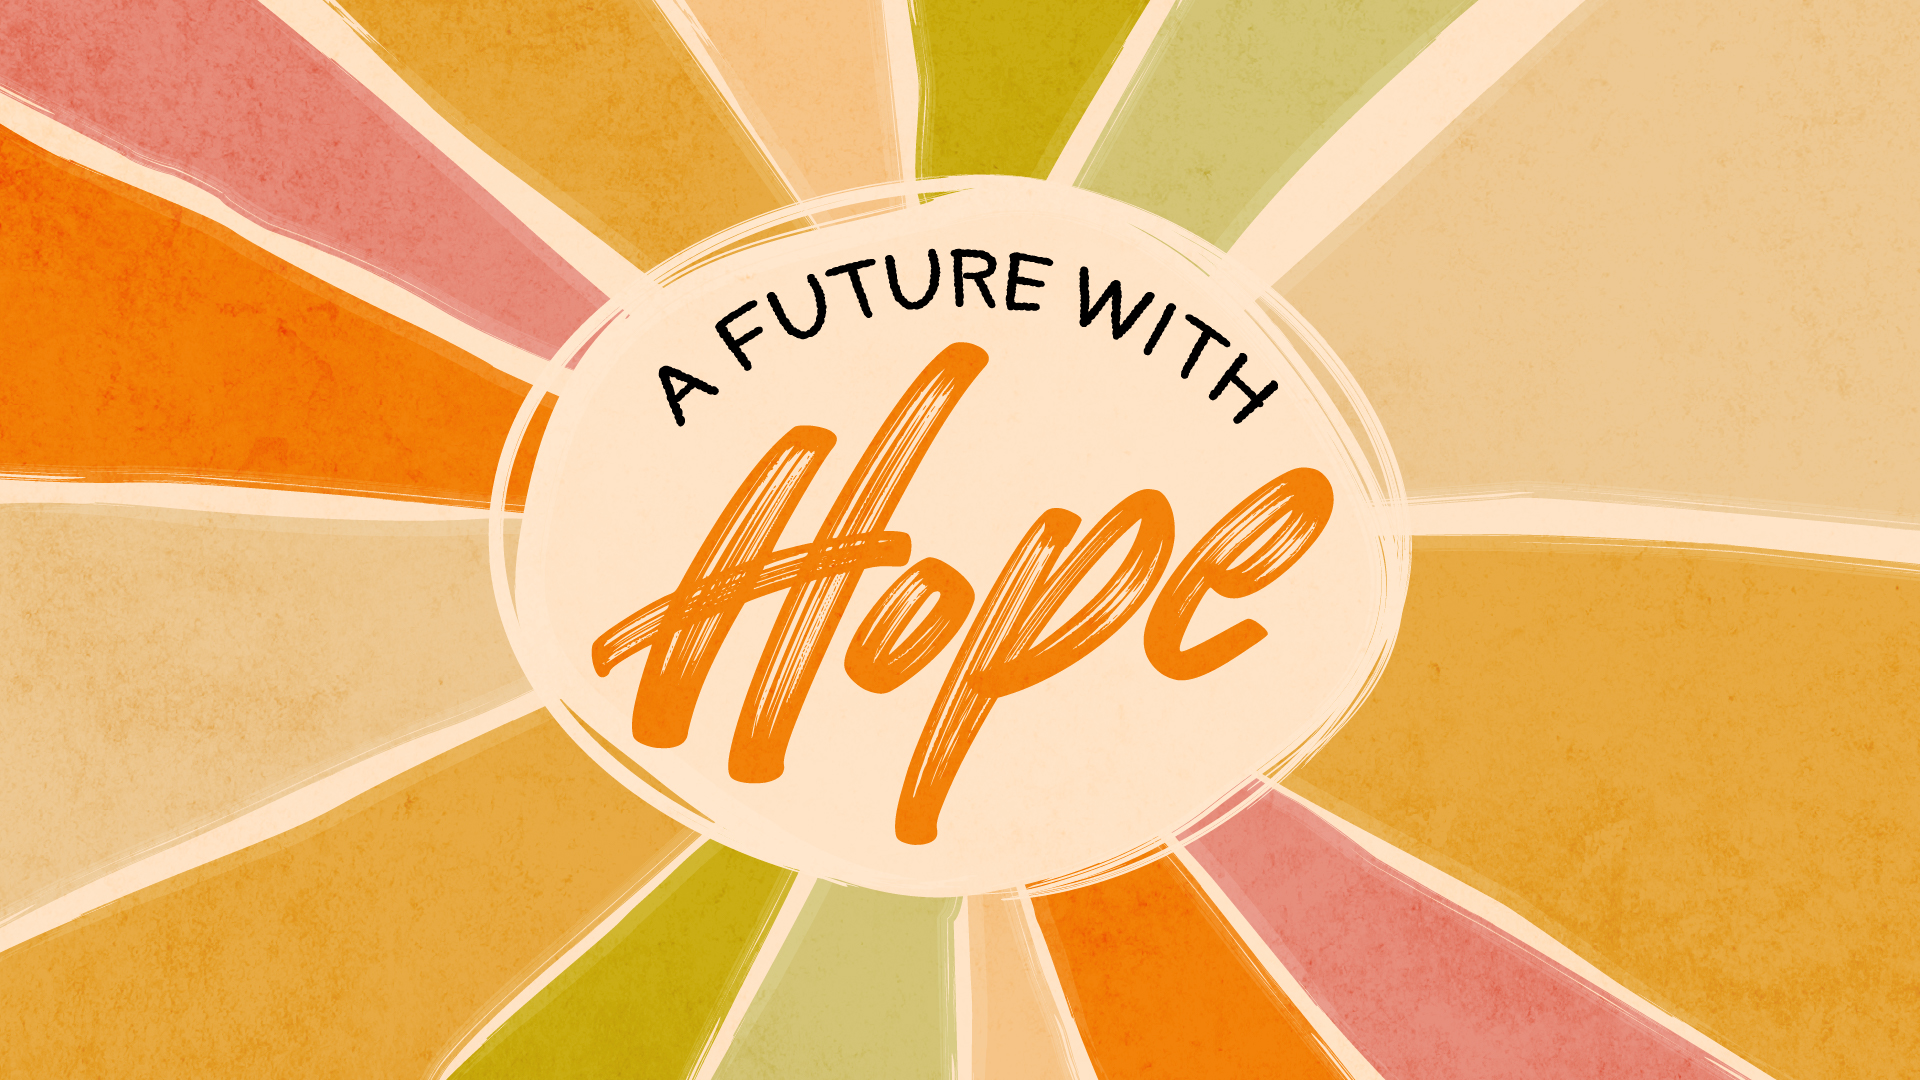 Sunday Worship: Claiming A Future With Hope